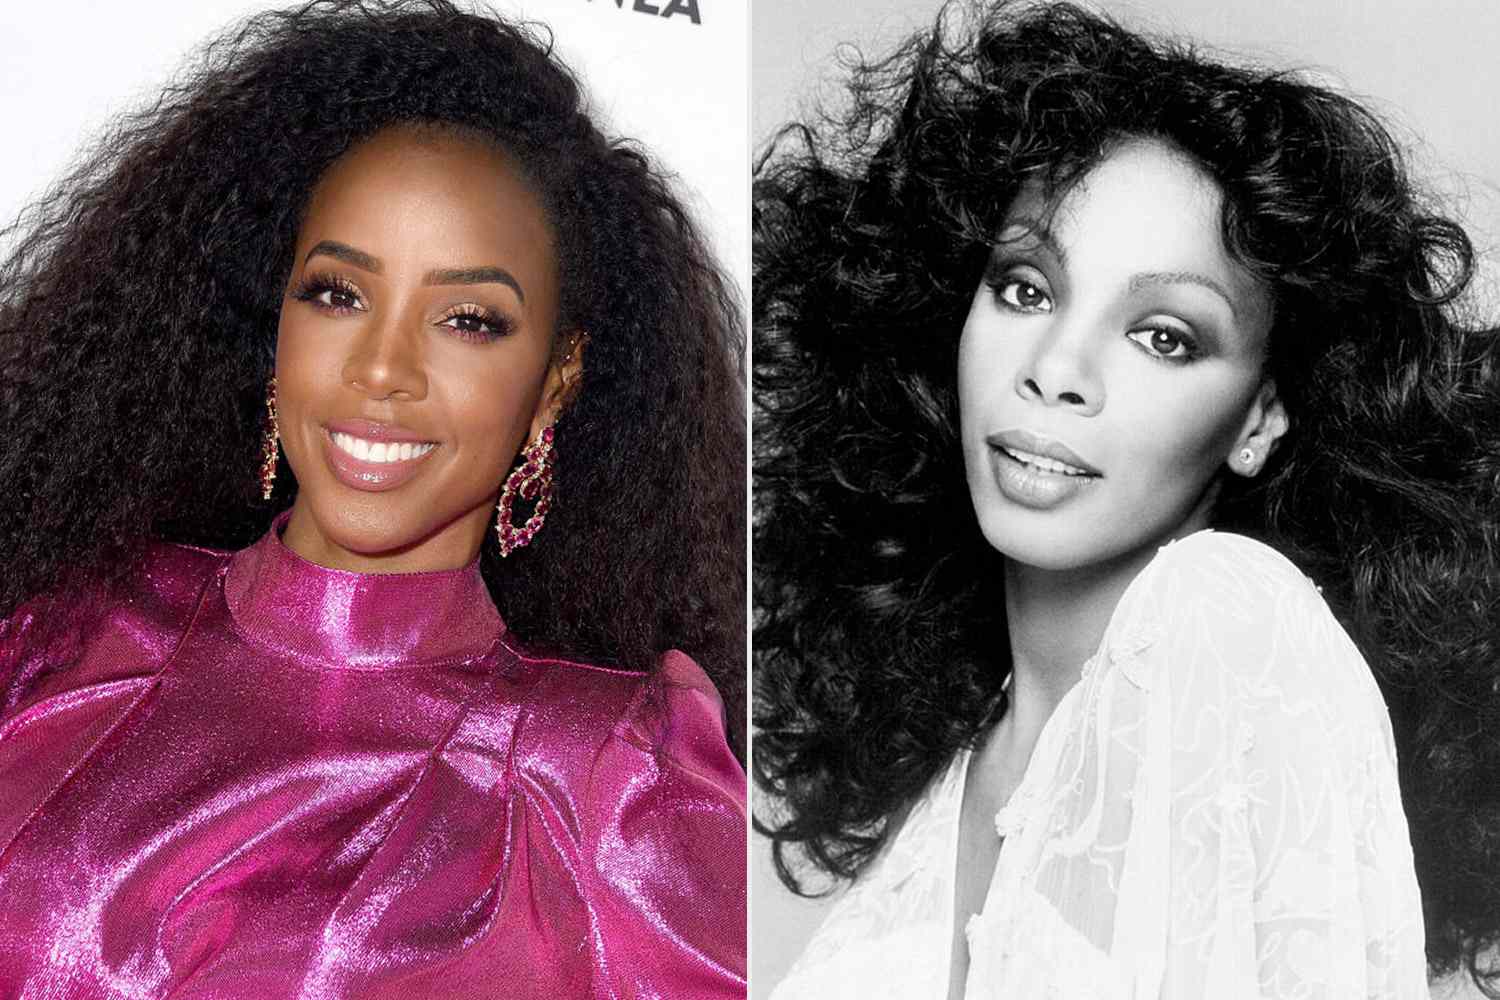 Brooklyn Sudano on Kelly Rowland Possibly Playing Her Mother Donna Summer in a Biopic